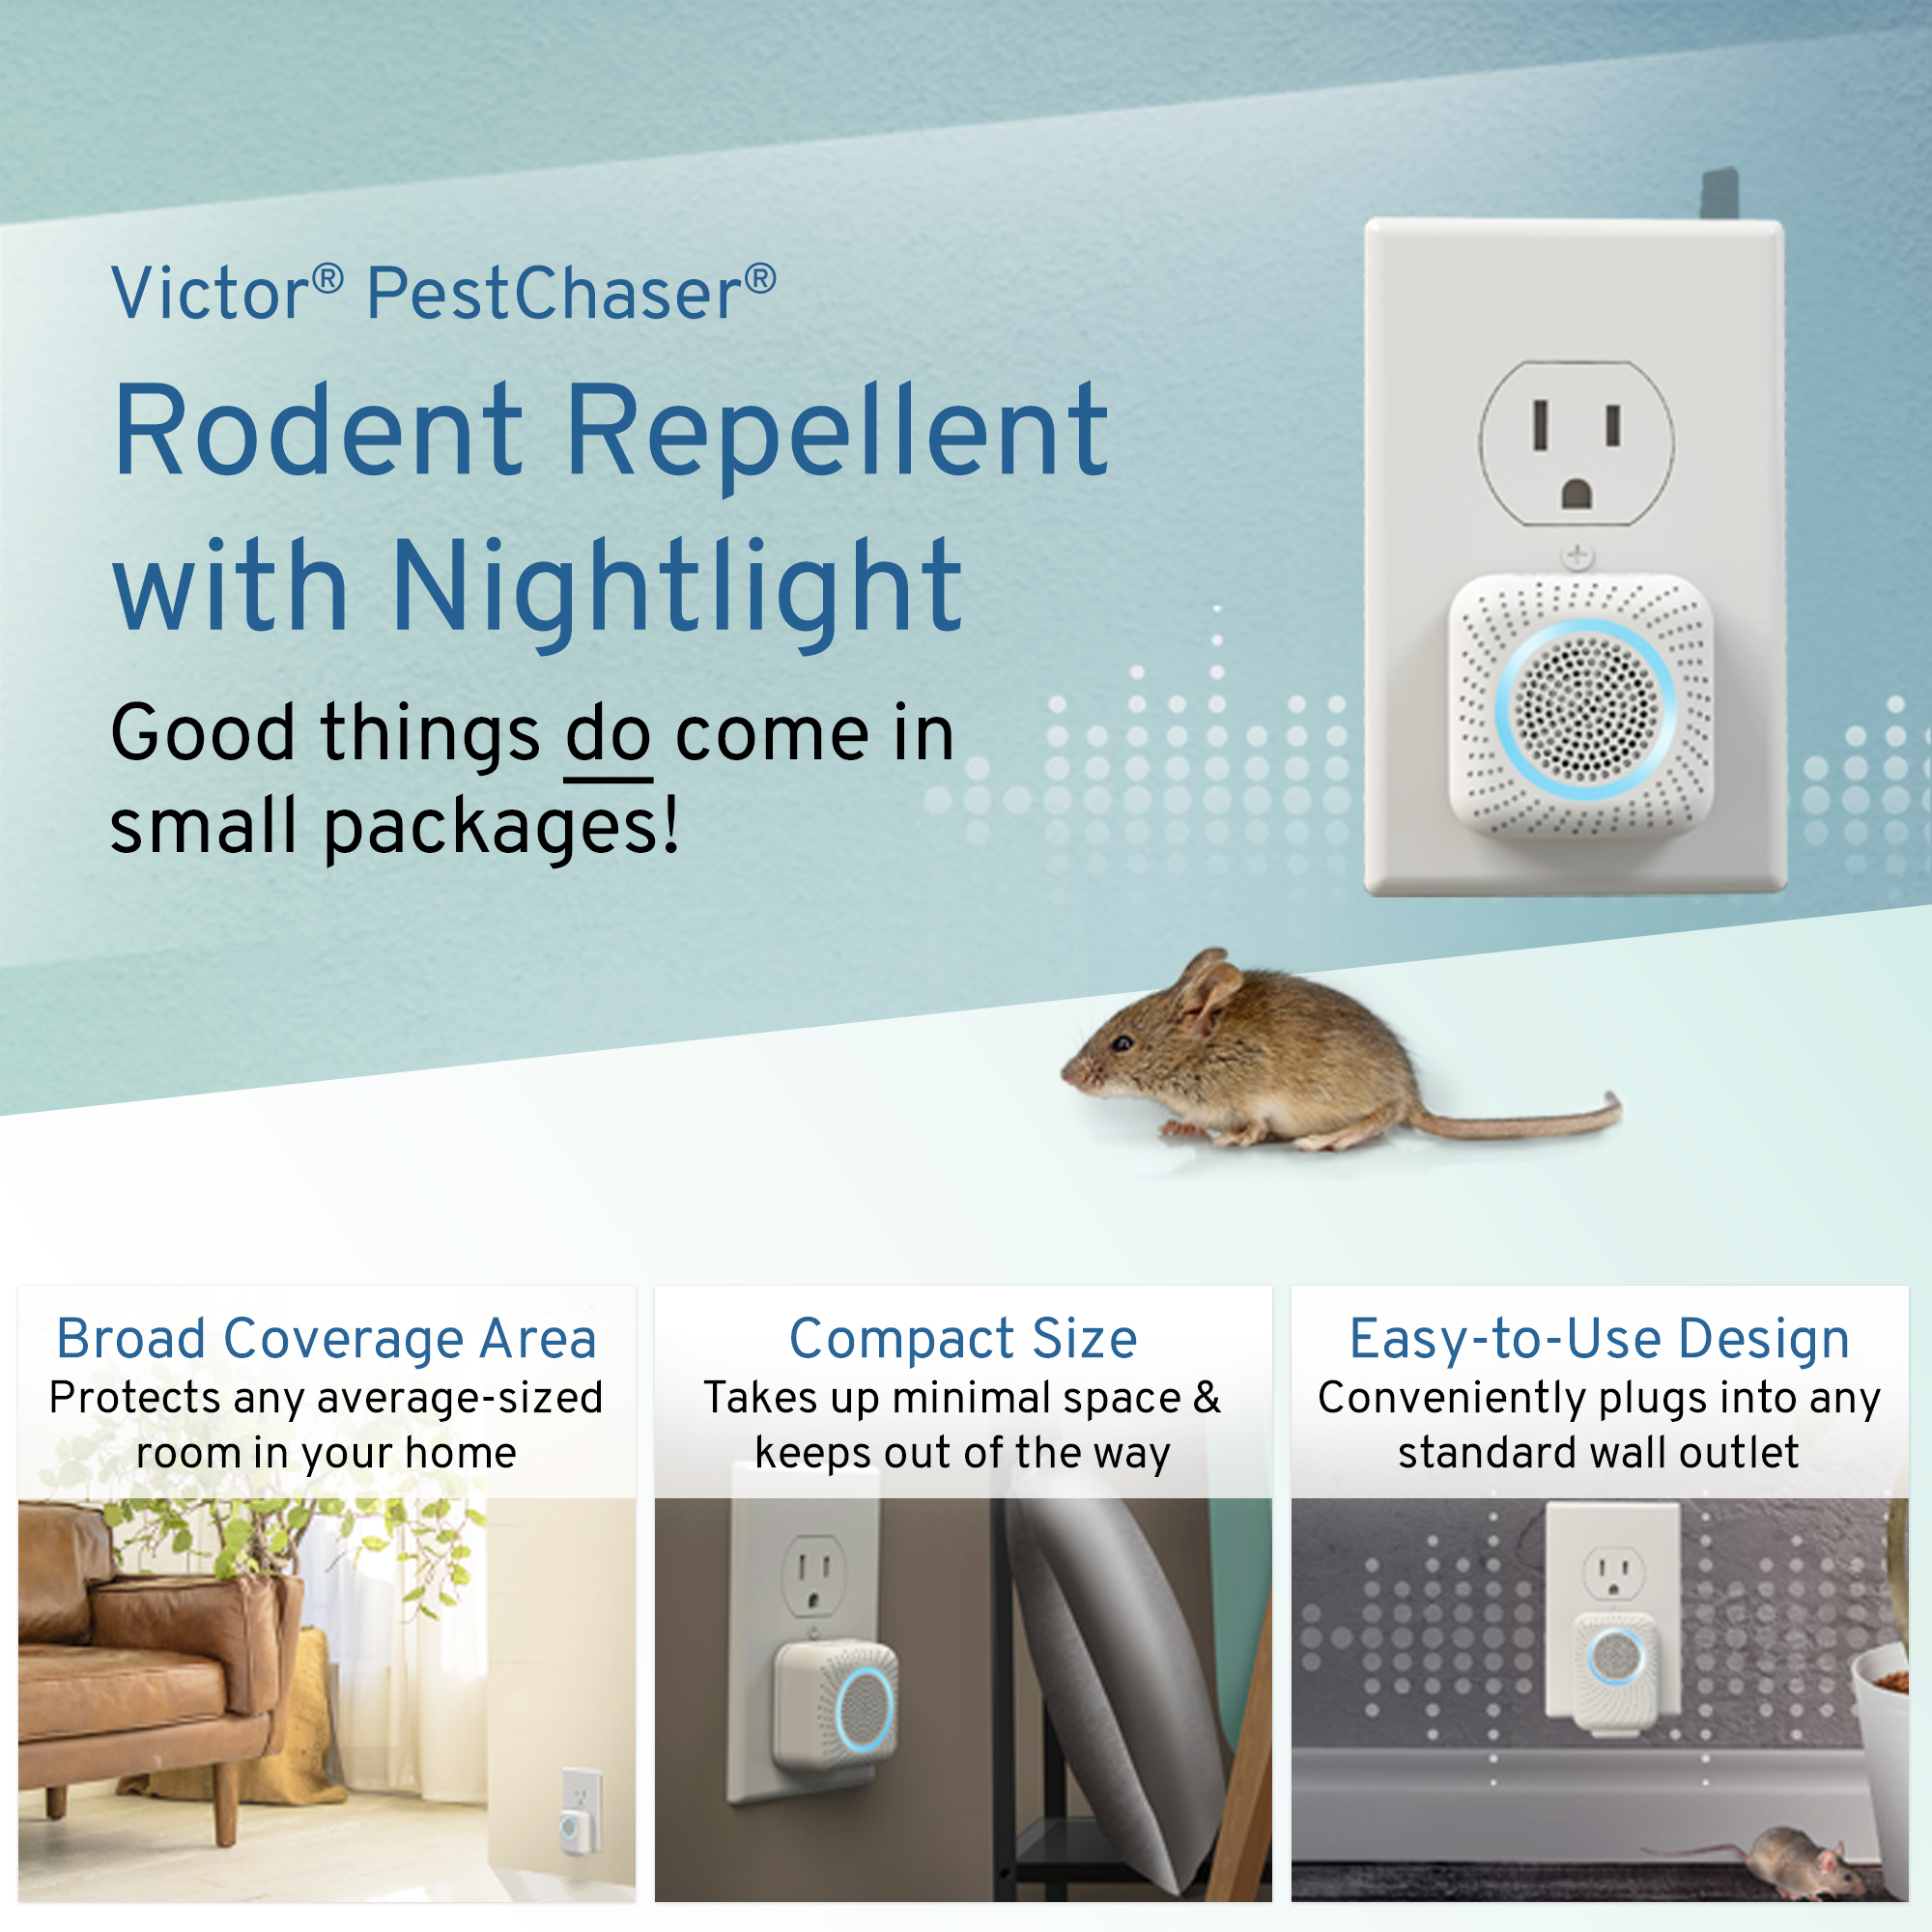 3-Pack Mini PestChaser Rodent Repeller with 1 Nightlight